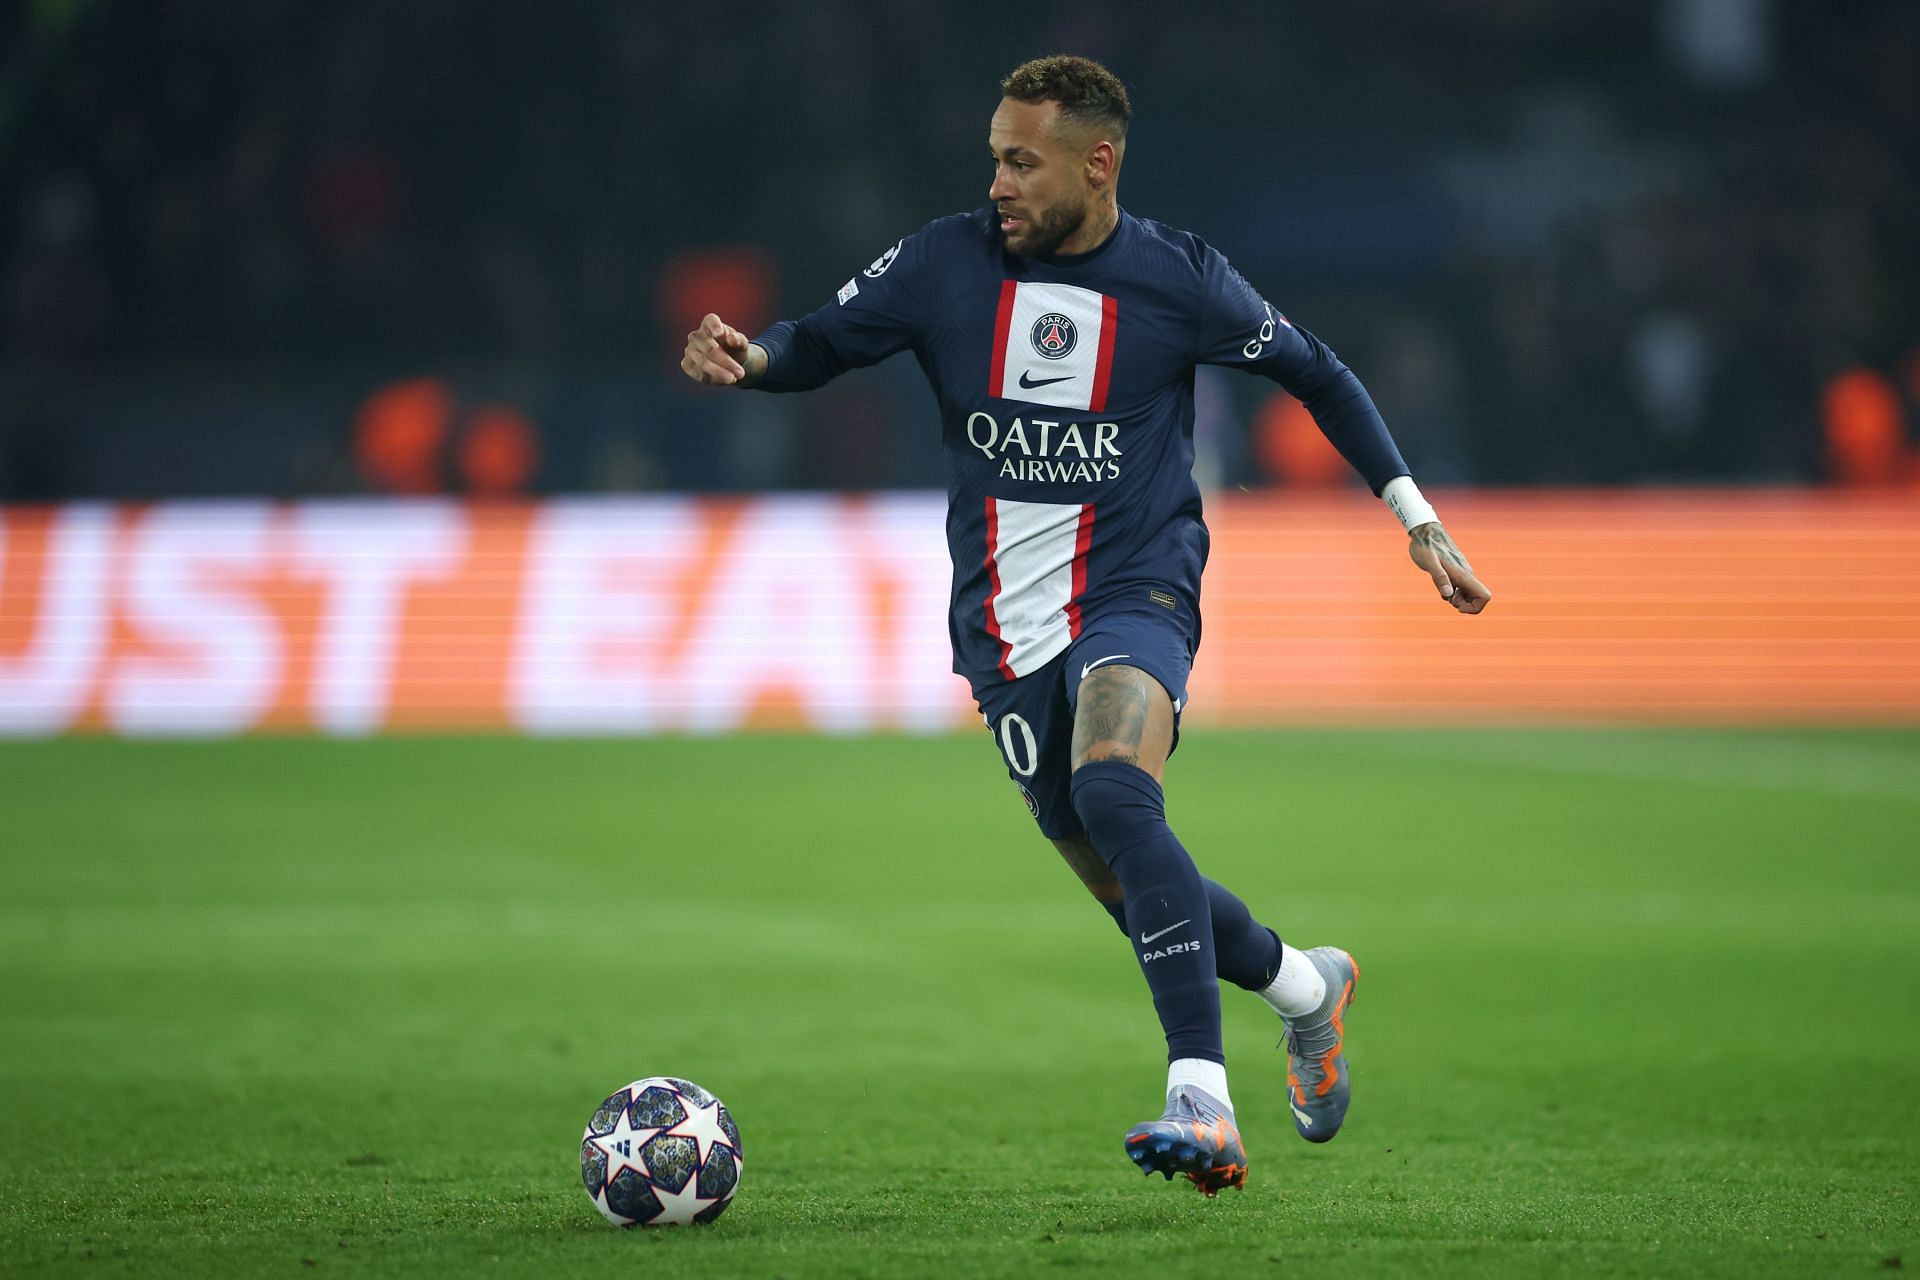 Neymar continues to be an enigma at the Parc des Princes.